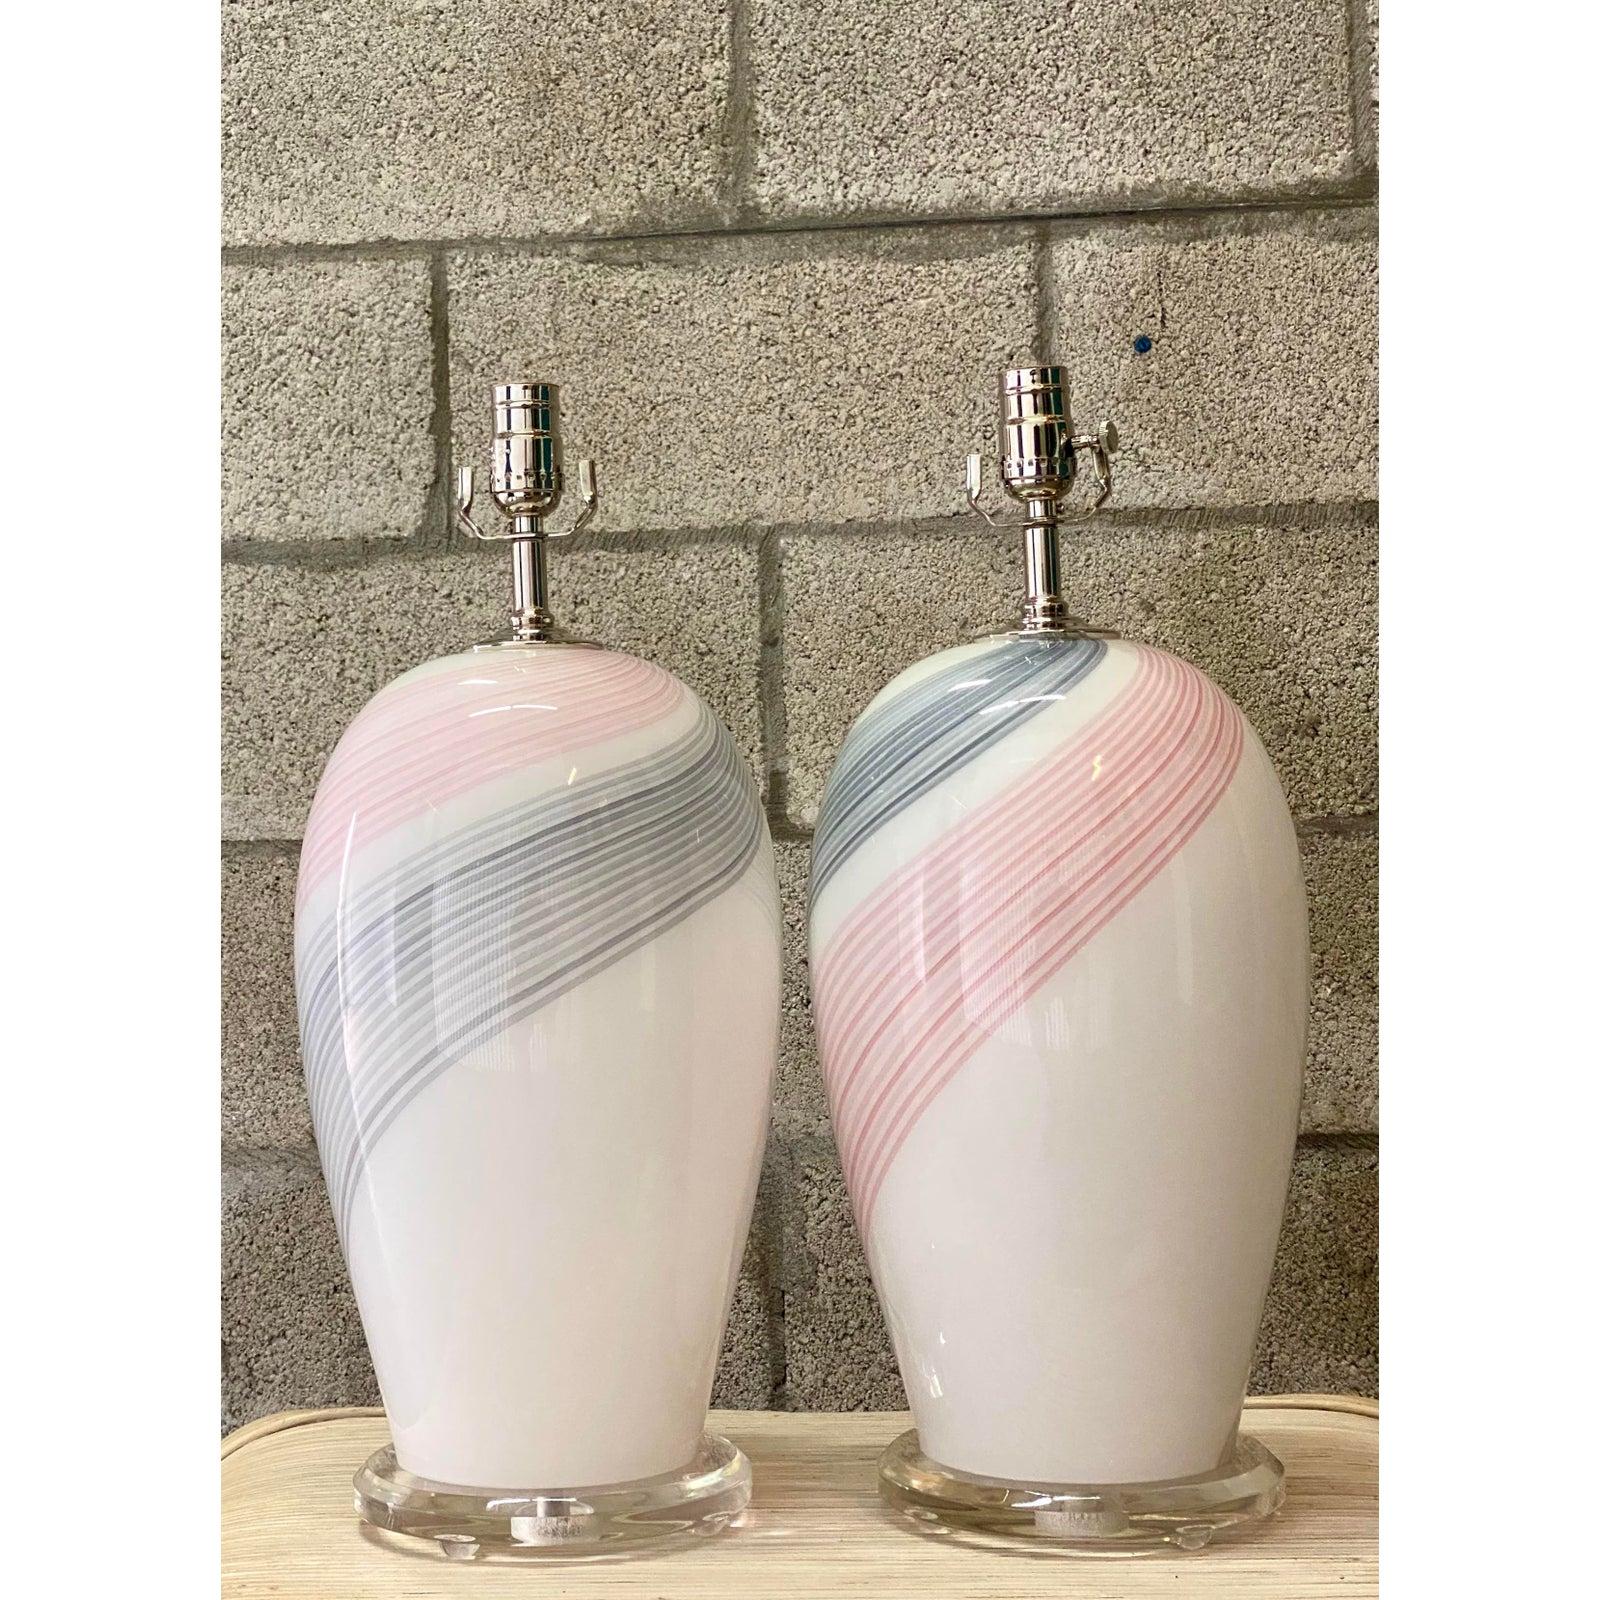 Fantastic pair of vintage Murano glass lamps. A beautiful swirl design in pink and grey. Rests on a lucite plinth. Completely restored with all new hardware and wiring by Heath lighting of Palm Beach. Acquired from a Palm Beach estate.